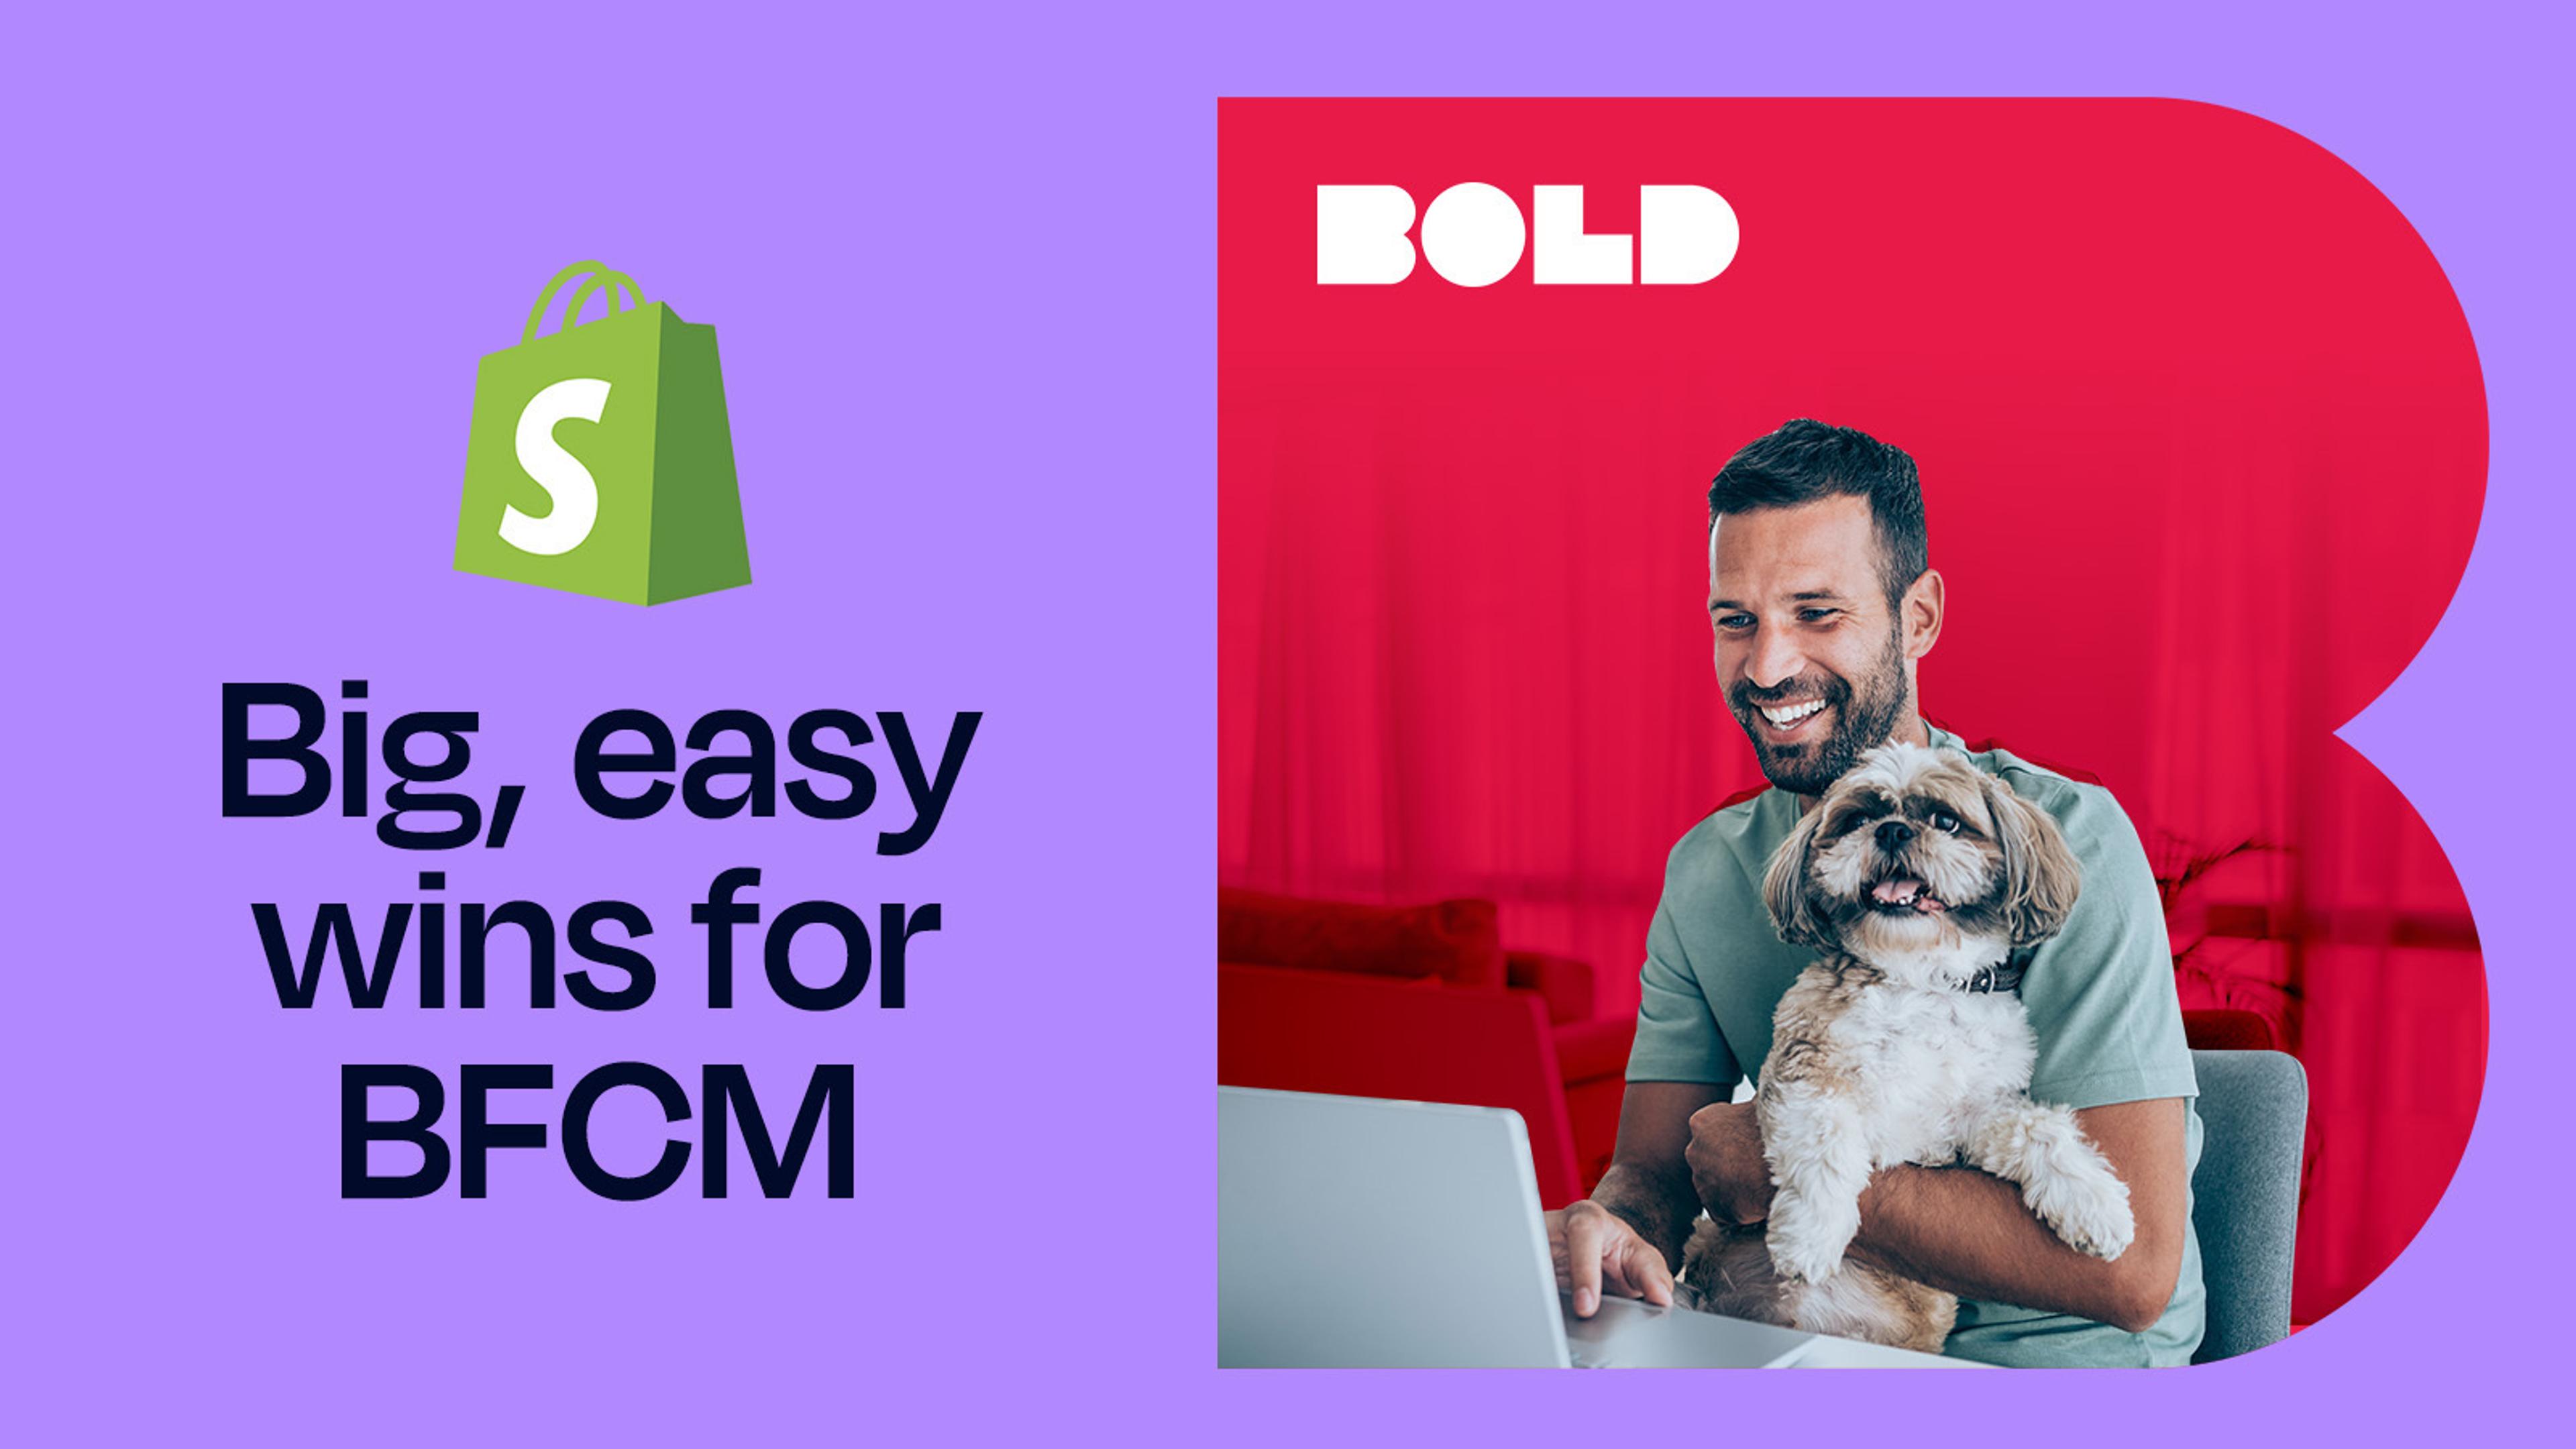 Image depicts a man accompanied by a dog, highlighting BFCM's bold easy wins.